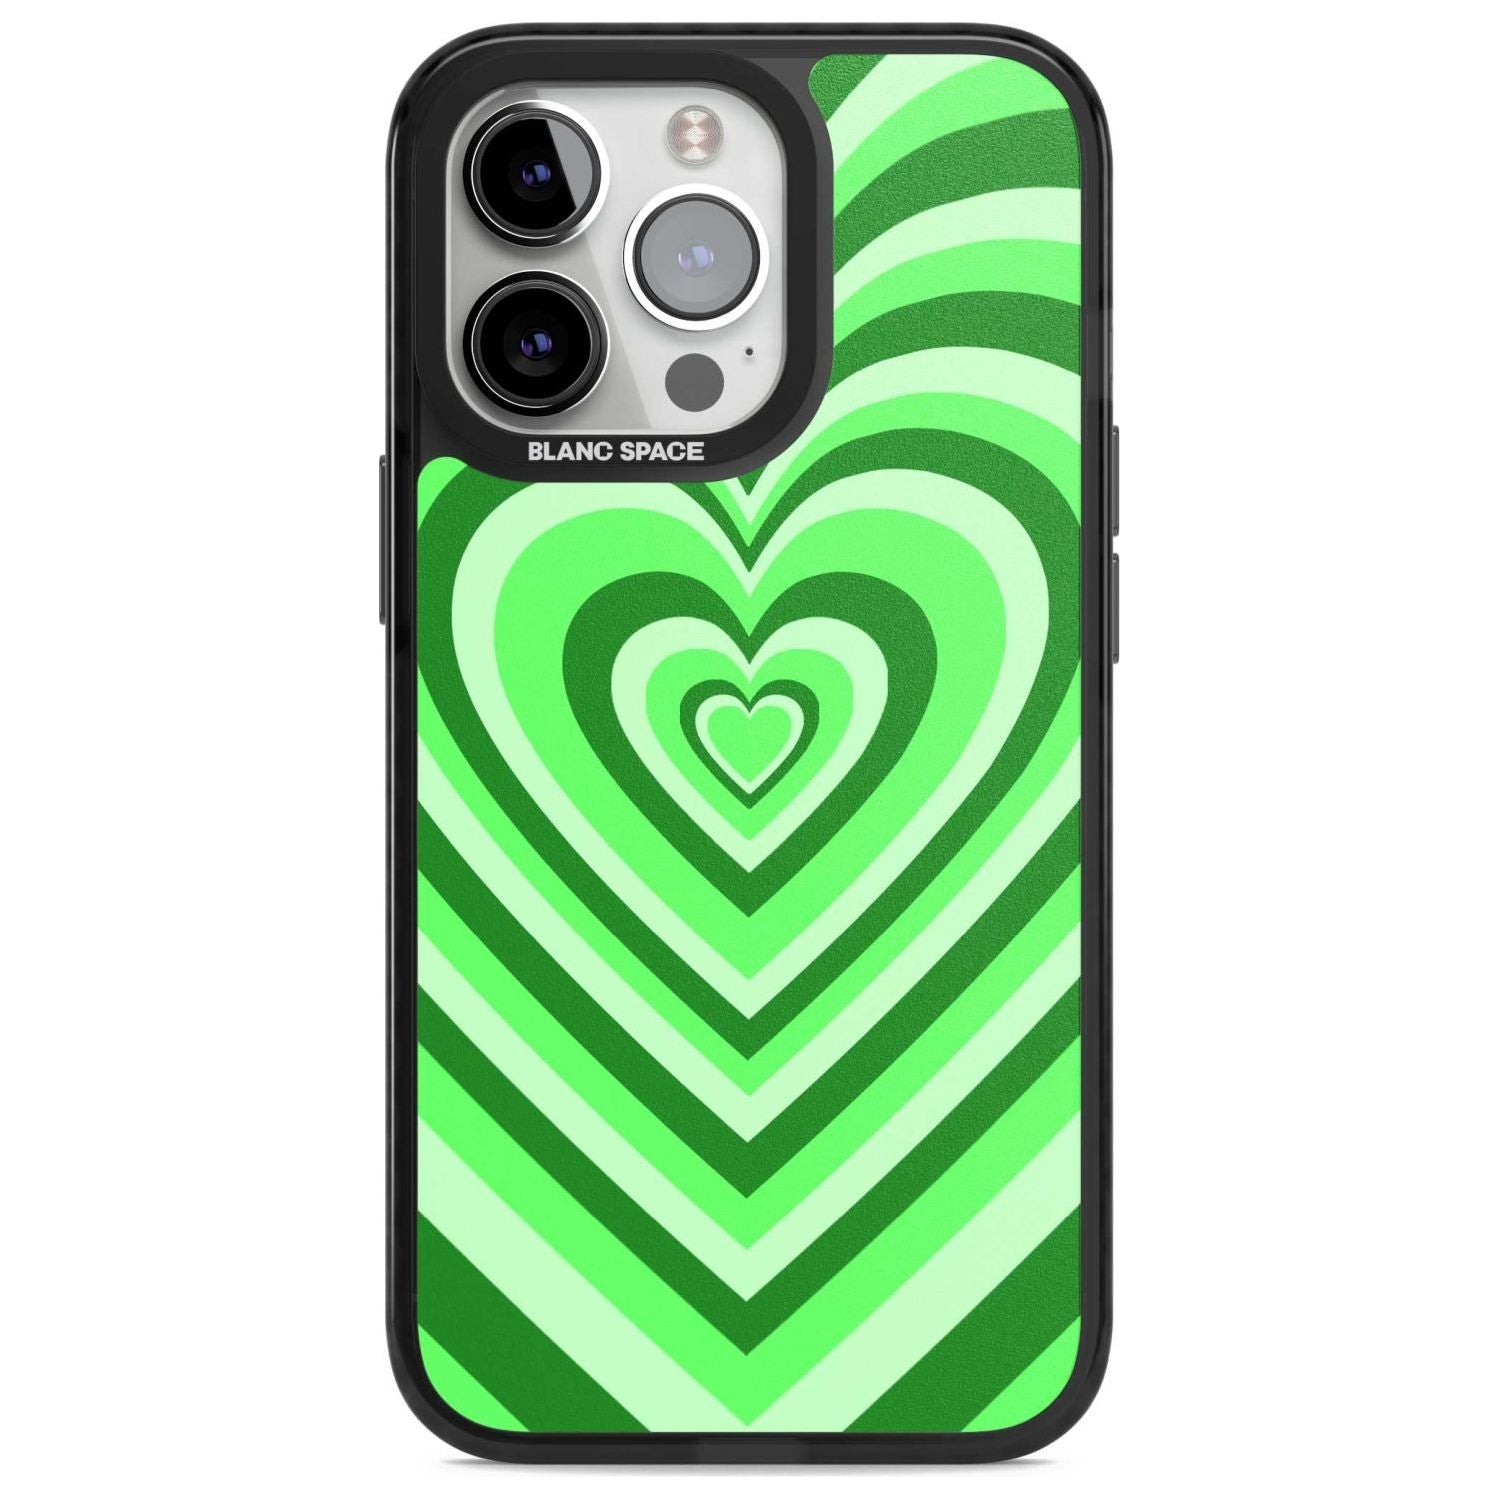 Green Heart Illusion Phone Case iPhone 15 Pro Max / Magsafe Black Impact Case,iPhone 15 Pro / Magsafe Black Impact Case,iPhone 14 Pro Max / Magsafe Black Impact Case,iPhone 14 Pro / Magsafe Black Impact Case,iPhone 13 Pro / Magsafe Black Impact Case Blanc Space